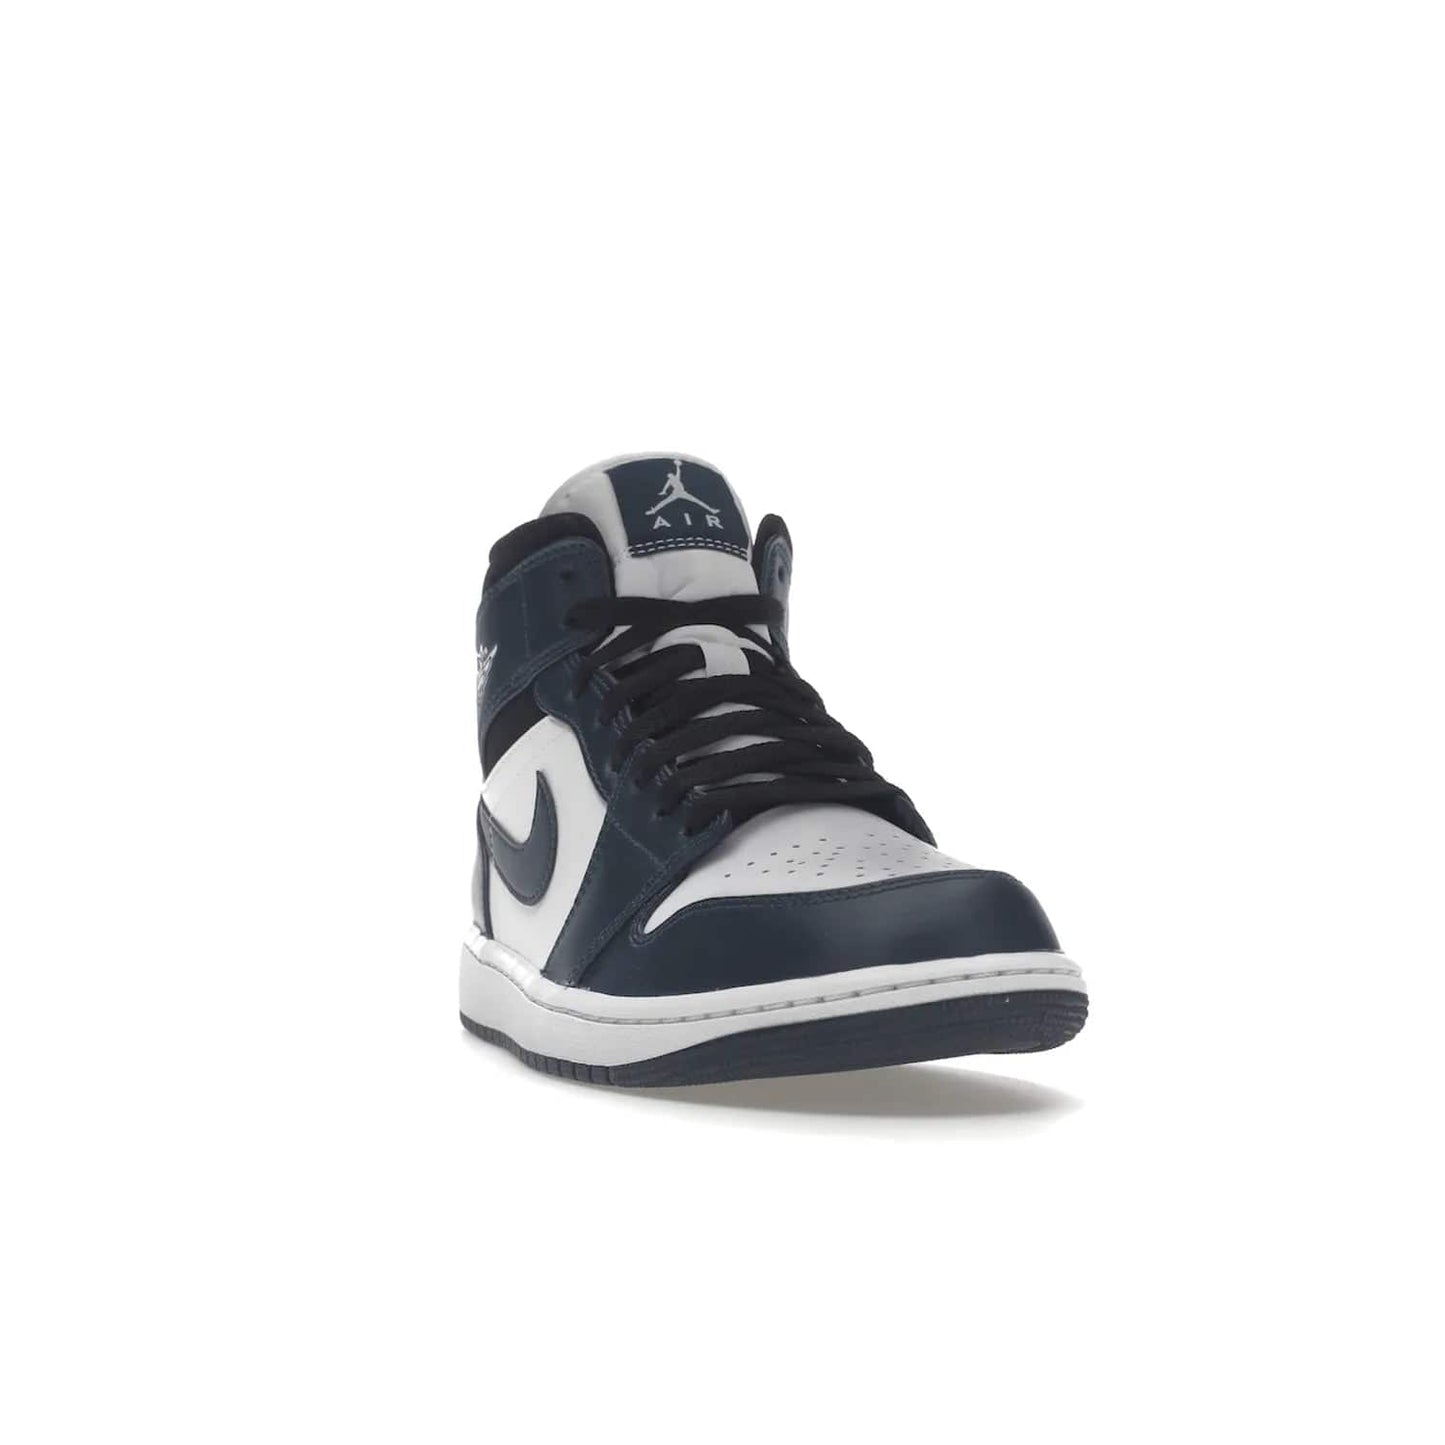 Jordan 1 Mid Armory Navy - Image 8 - Only at www.BallersClubKickz.com - The Jordan 1 Mid Armory Navy: classic basketball sneaker with soft white leather upper, deep navy blue overlays, and black leather ankle detailing. Iconic style with Jordan Wings logo and Jumpman label.